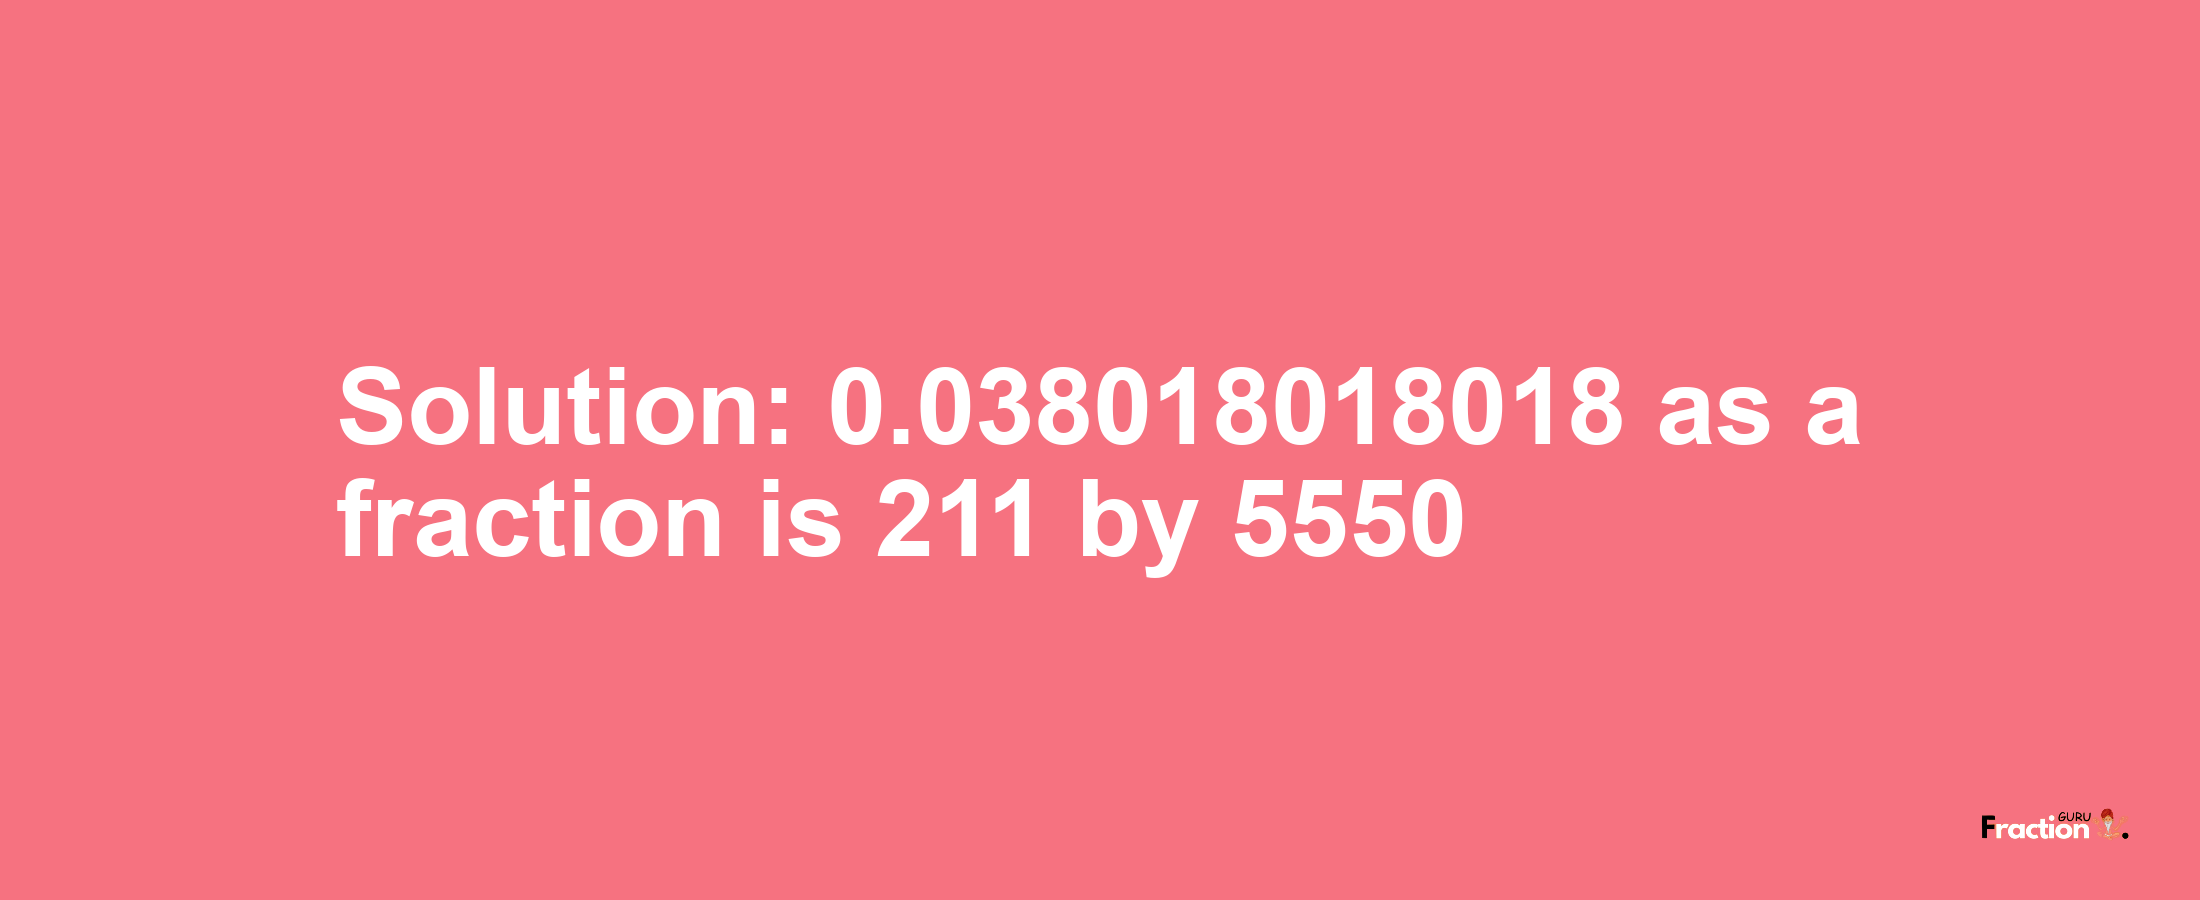 Solution:0.038018018018 as a fraction is 211/5550